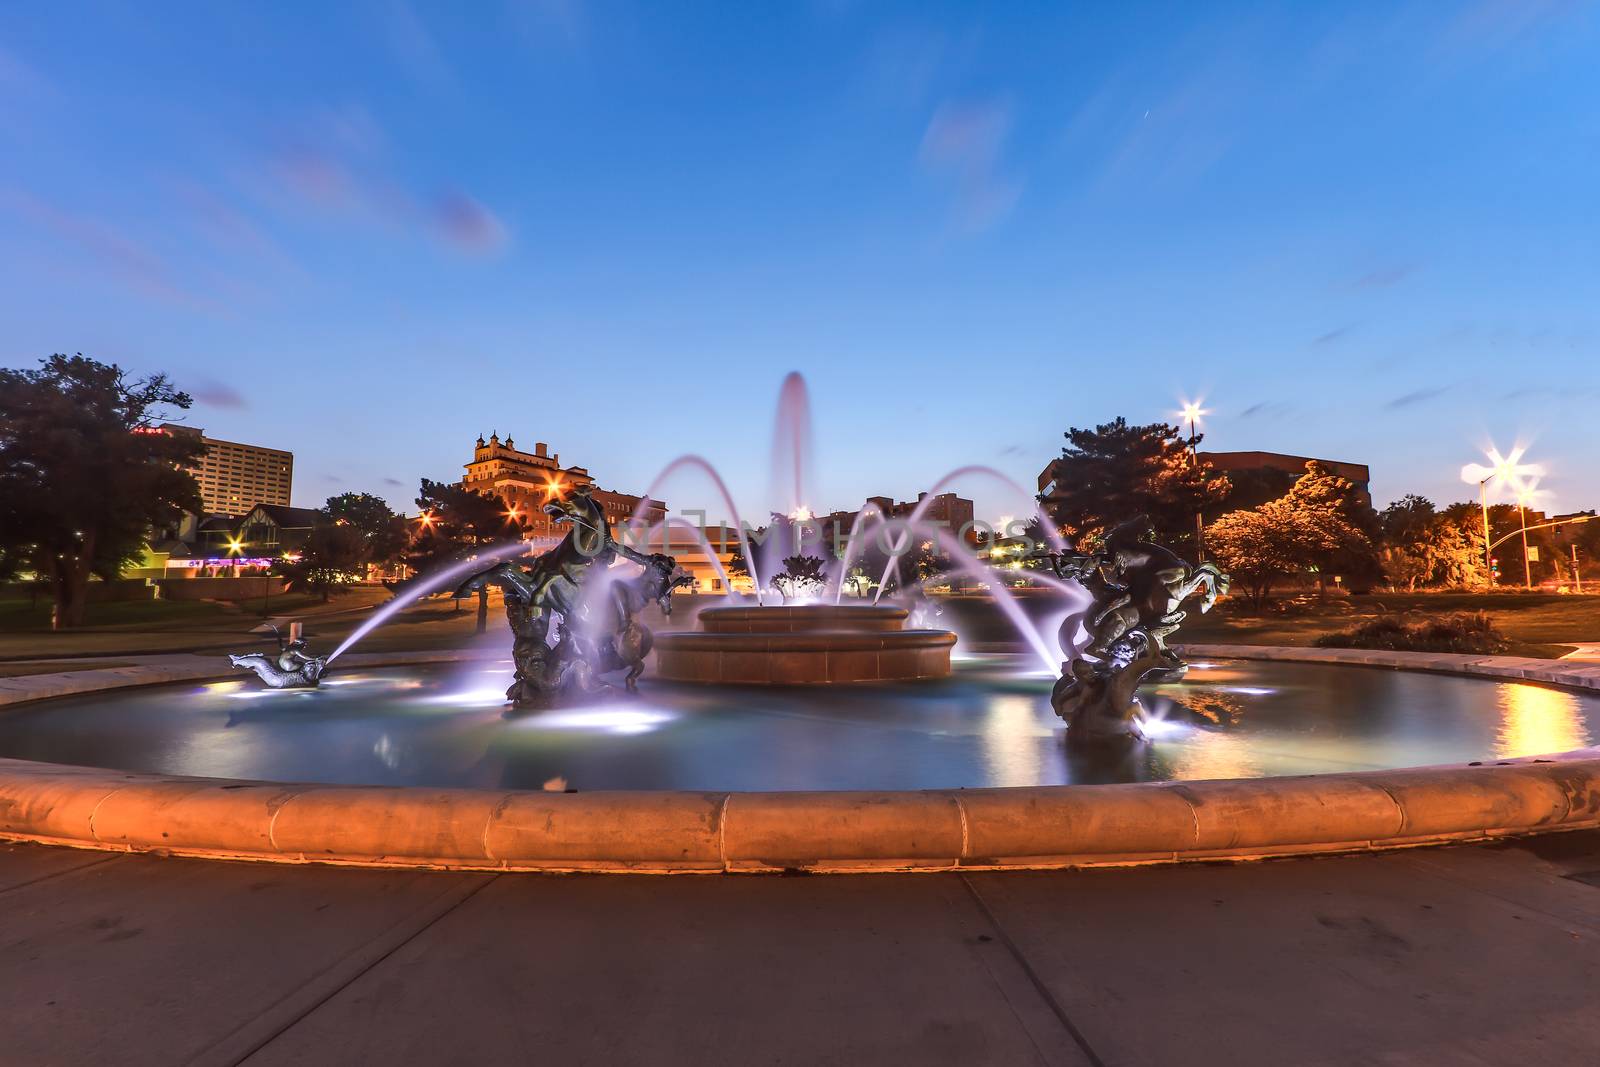 J.C. Nichols Memorial Fountain by the Kansas City Country Club Plaza is a popular tourist area